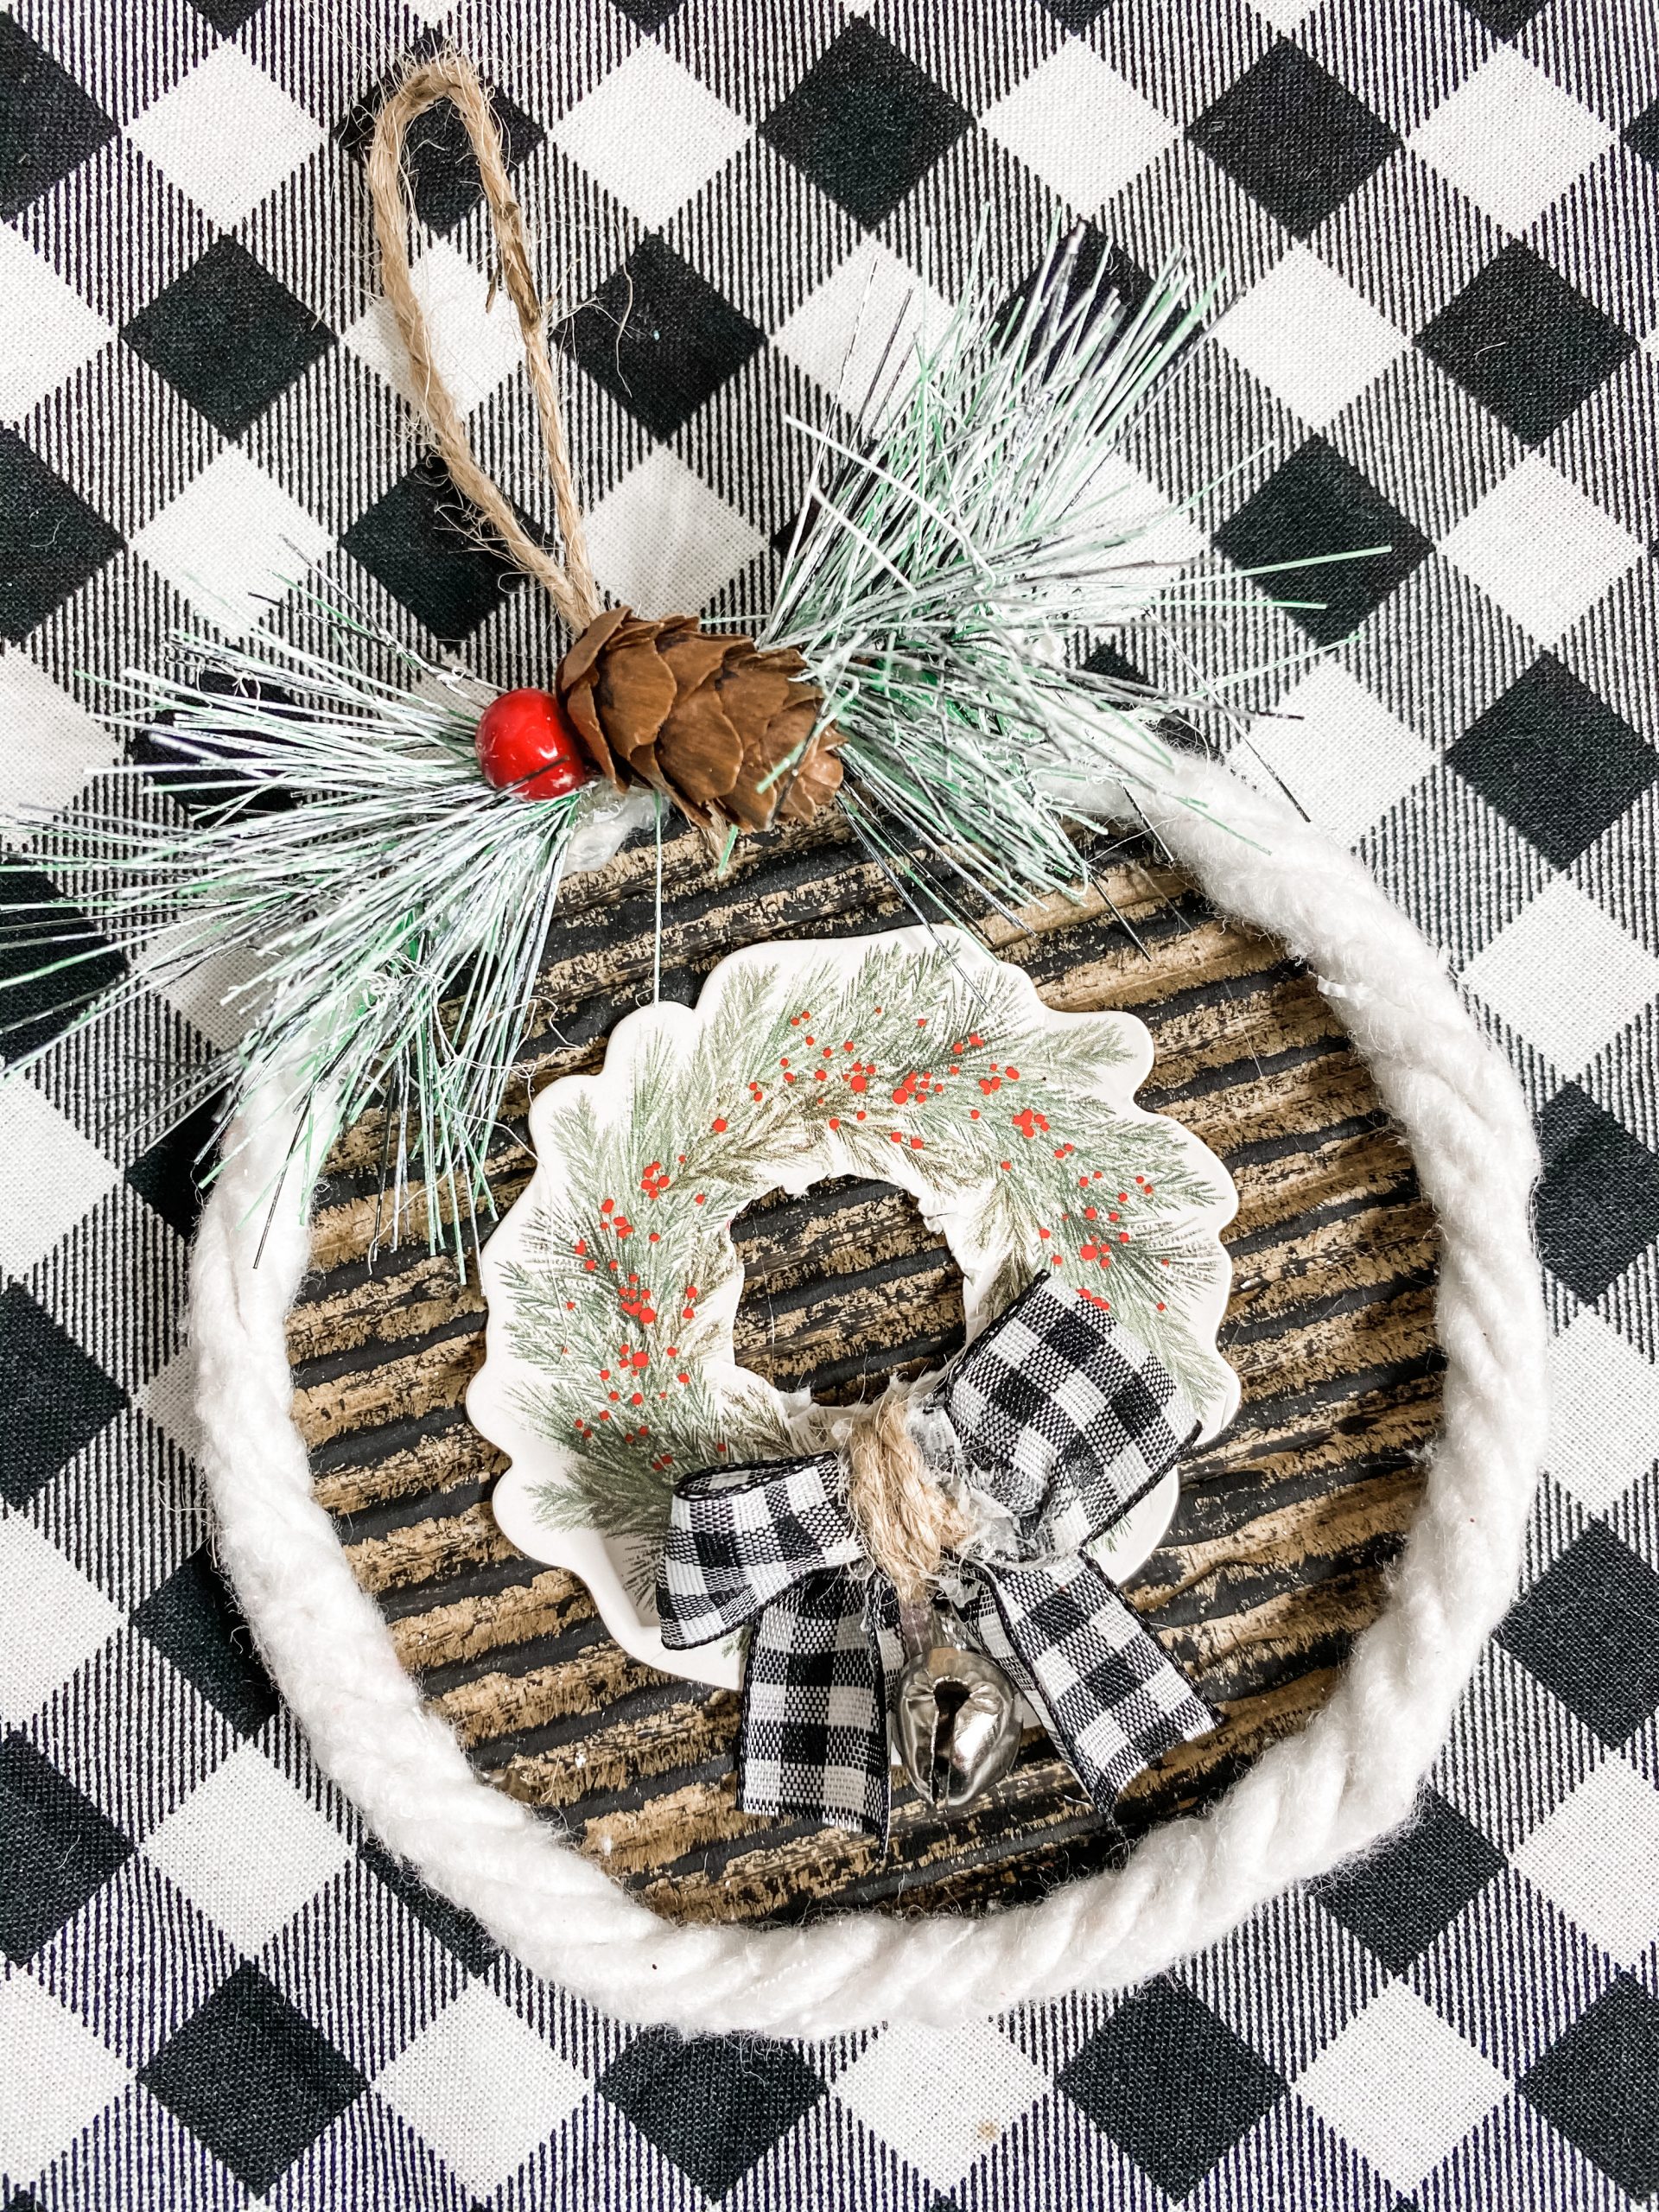 How to Make a Christmas Ornament DIY with Cardboard 